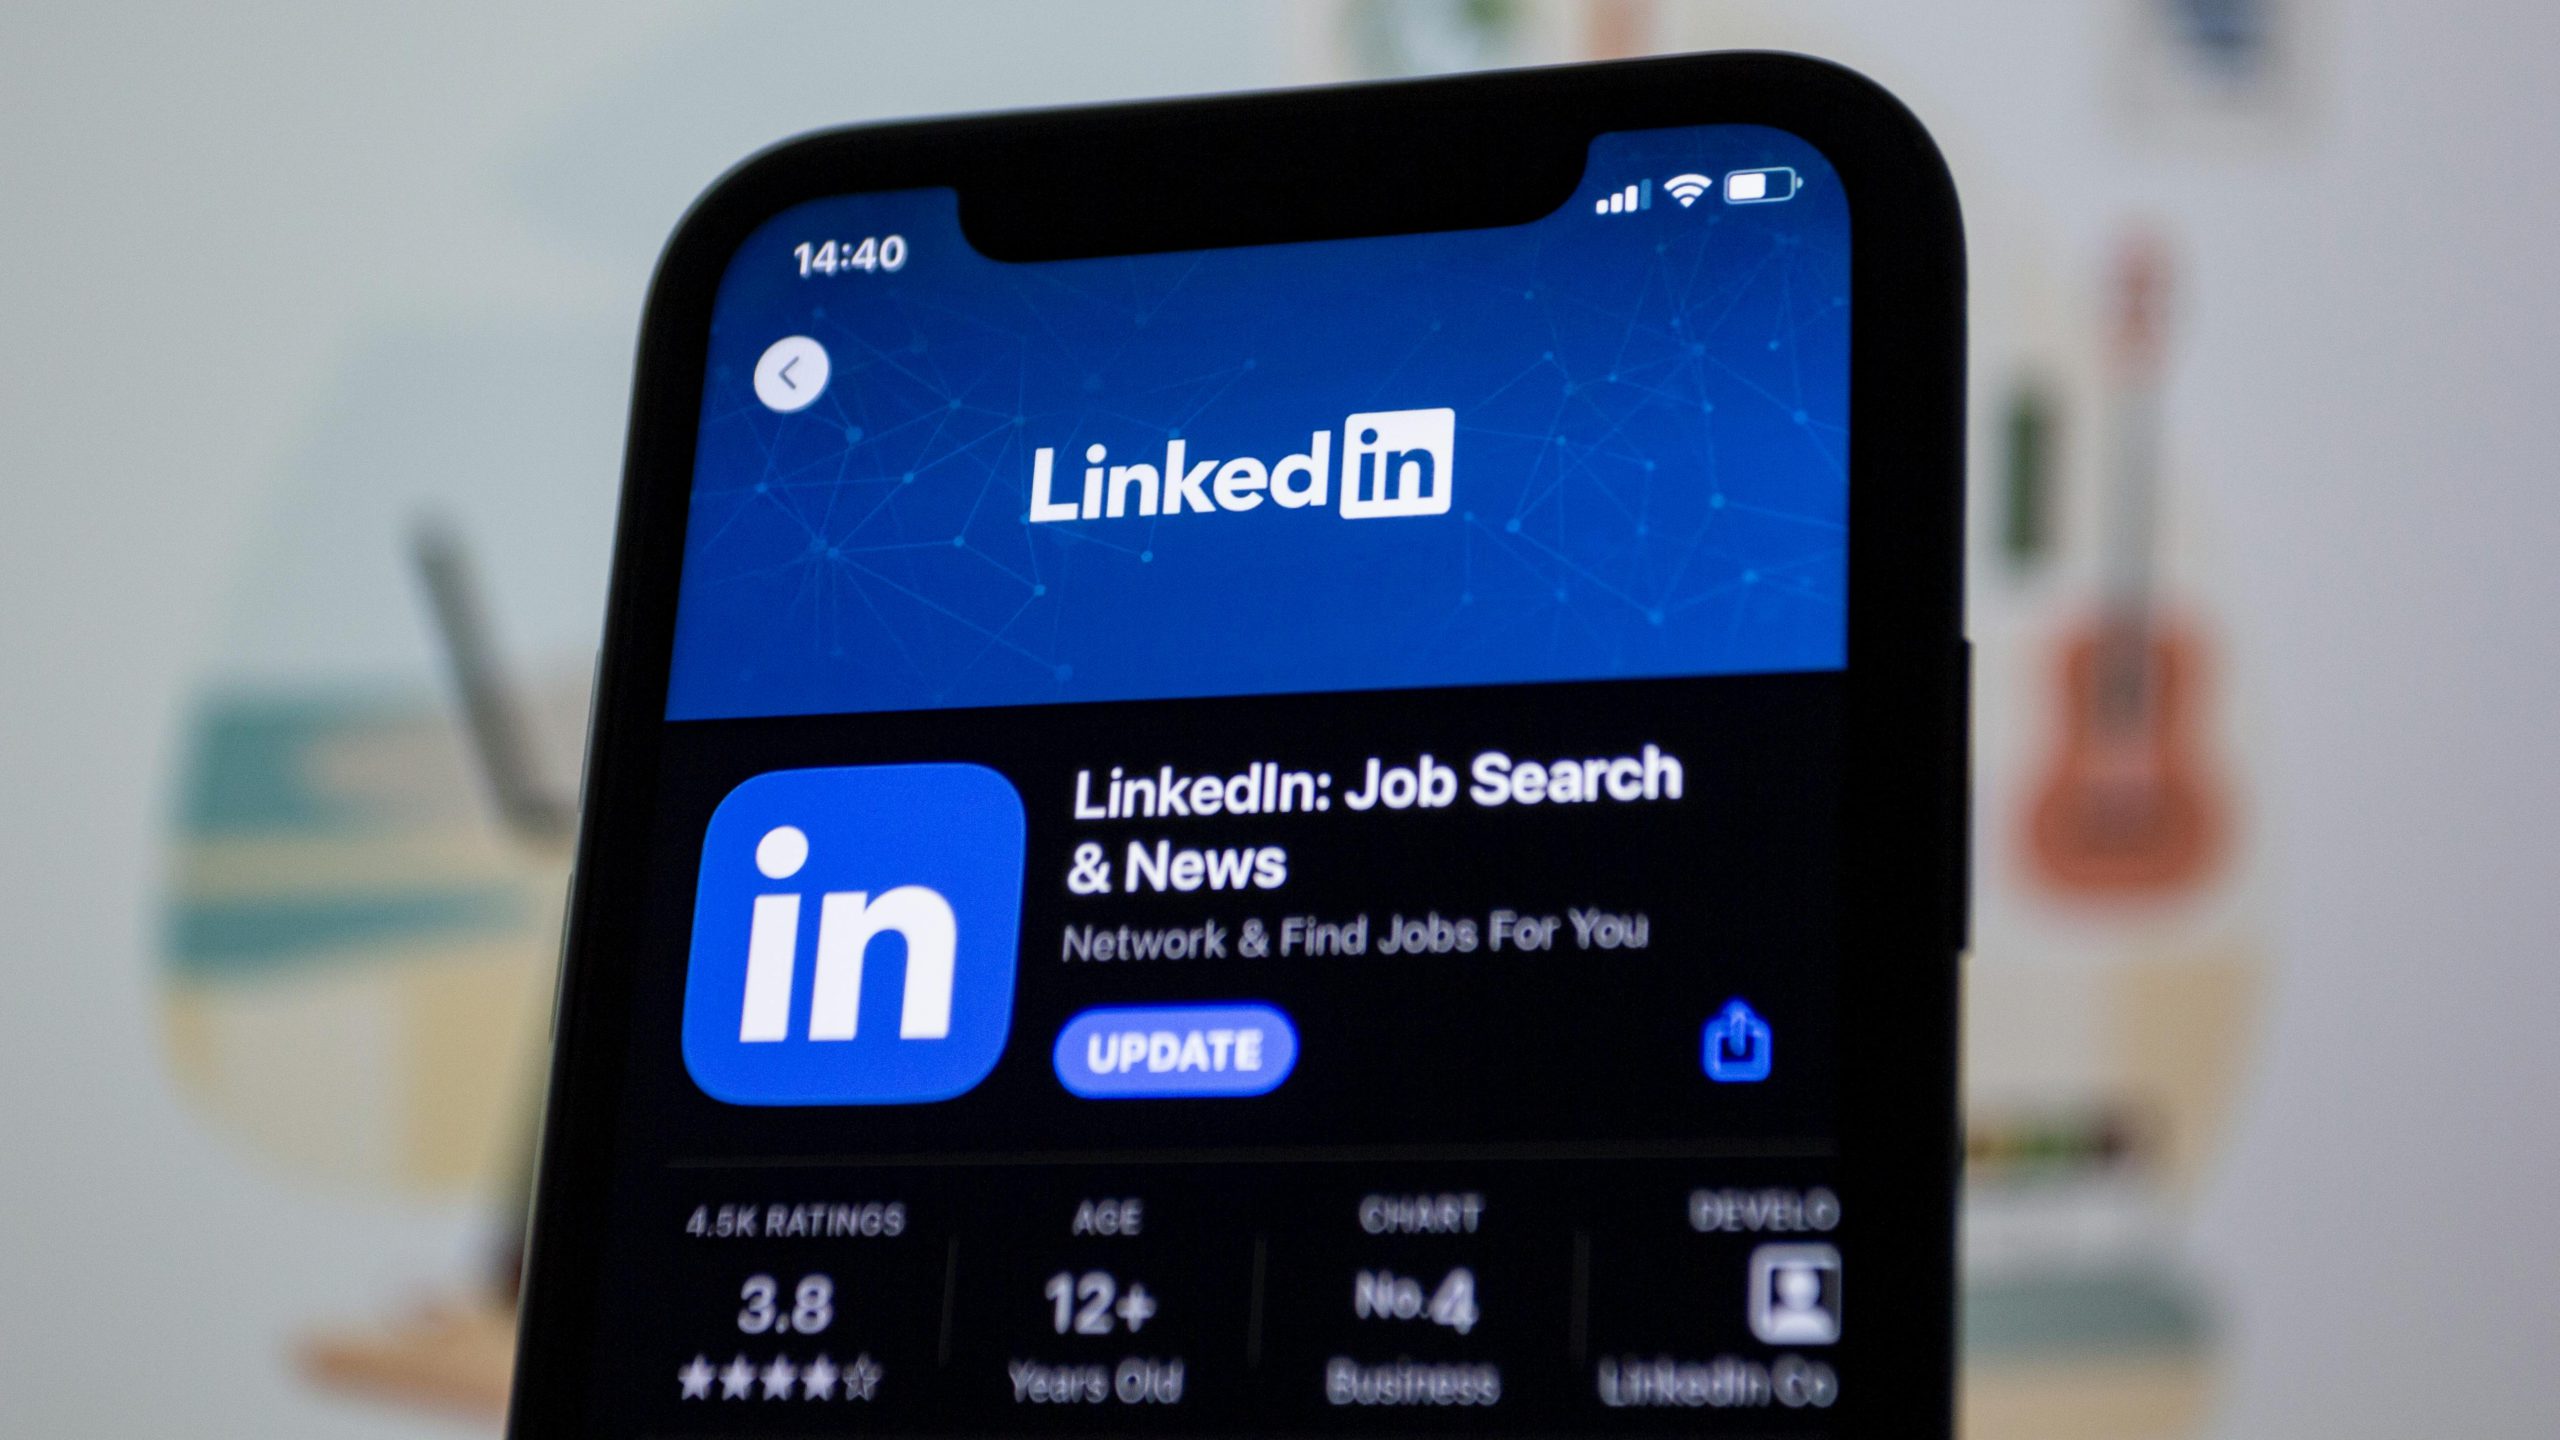 Read more about the article Advertise on Linkedin for Free ! Unlocking Opportunities:<span class="rmp-archive-results-widget "><i class=" rmp-icon rmp-icon--ratings rmp-icon--star rmp-icon--full-highlight"></i><i class=" rmp-icon rmp-icon--ratings rmp-icon--star rmp-icon--full-highlight"></i><i class=" rmp-icon rmp-icon--ratings rmp-icon--star rmp-icon--full-highlight"></i><i class=" rmp-icon rmp-icon--ratings rmp-icon--star rmp-icon--full-highlight"></i><i class=" rmp-icon rmp-icon--ratings rmp-icon--star rmp-icon--full-highlight"></i> <span>5 (125)</span></span>